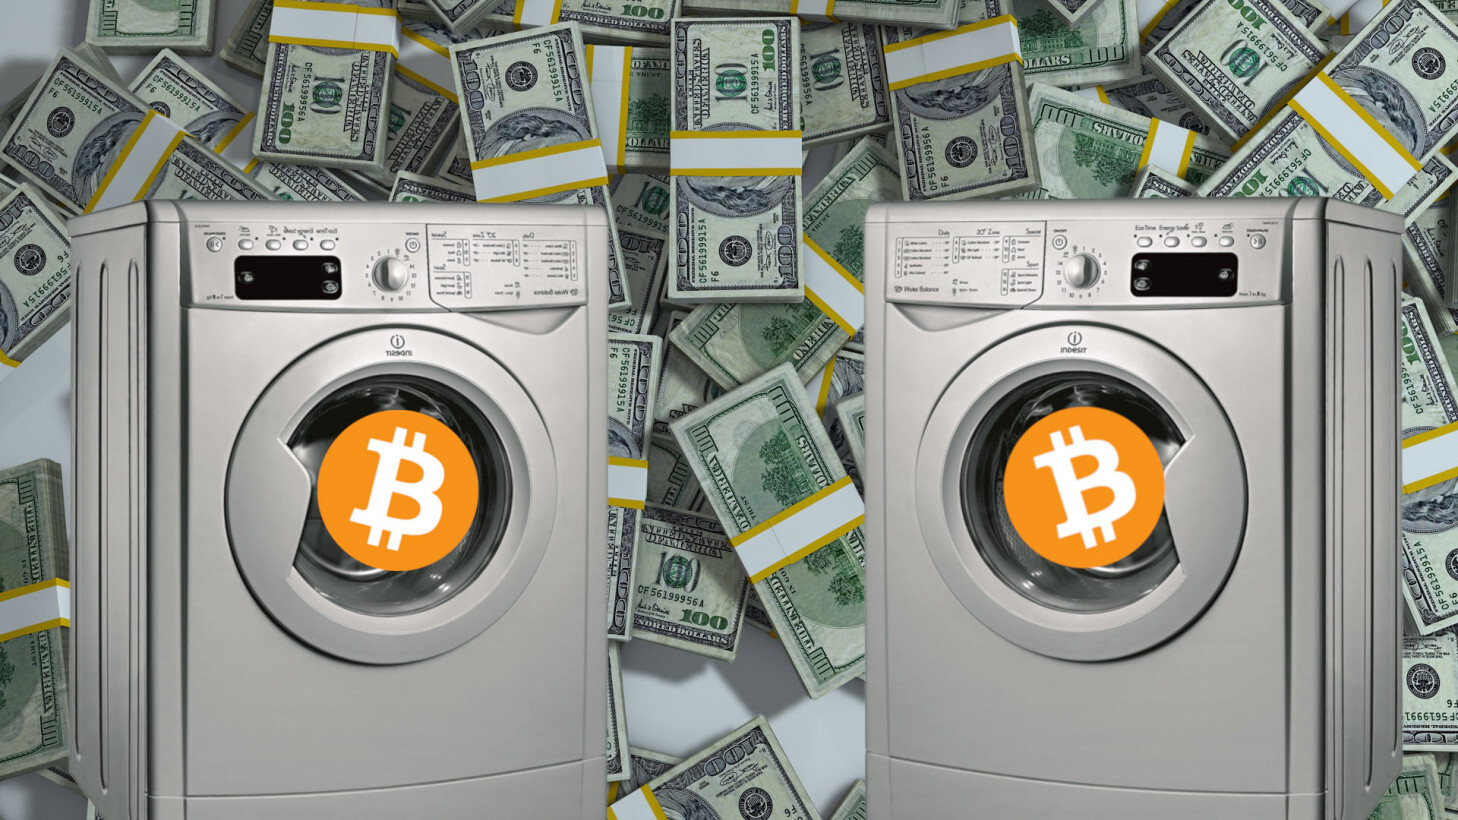 Cryptocurrency exchange WEX/BTC-e tied to Bitcoin ransomware hackers, report